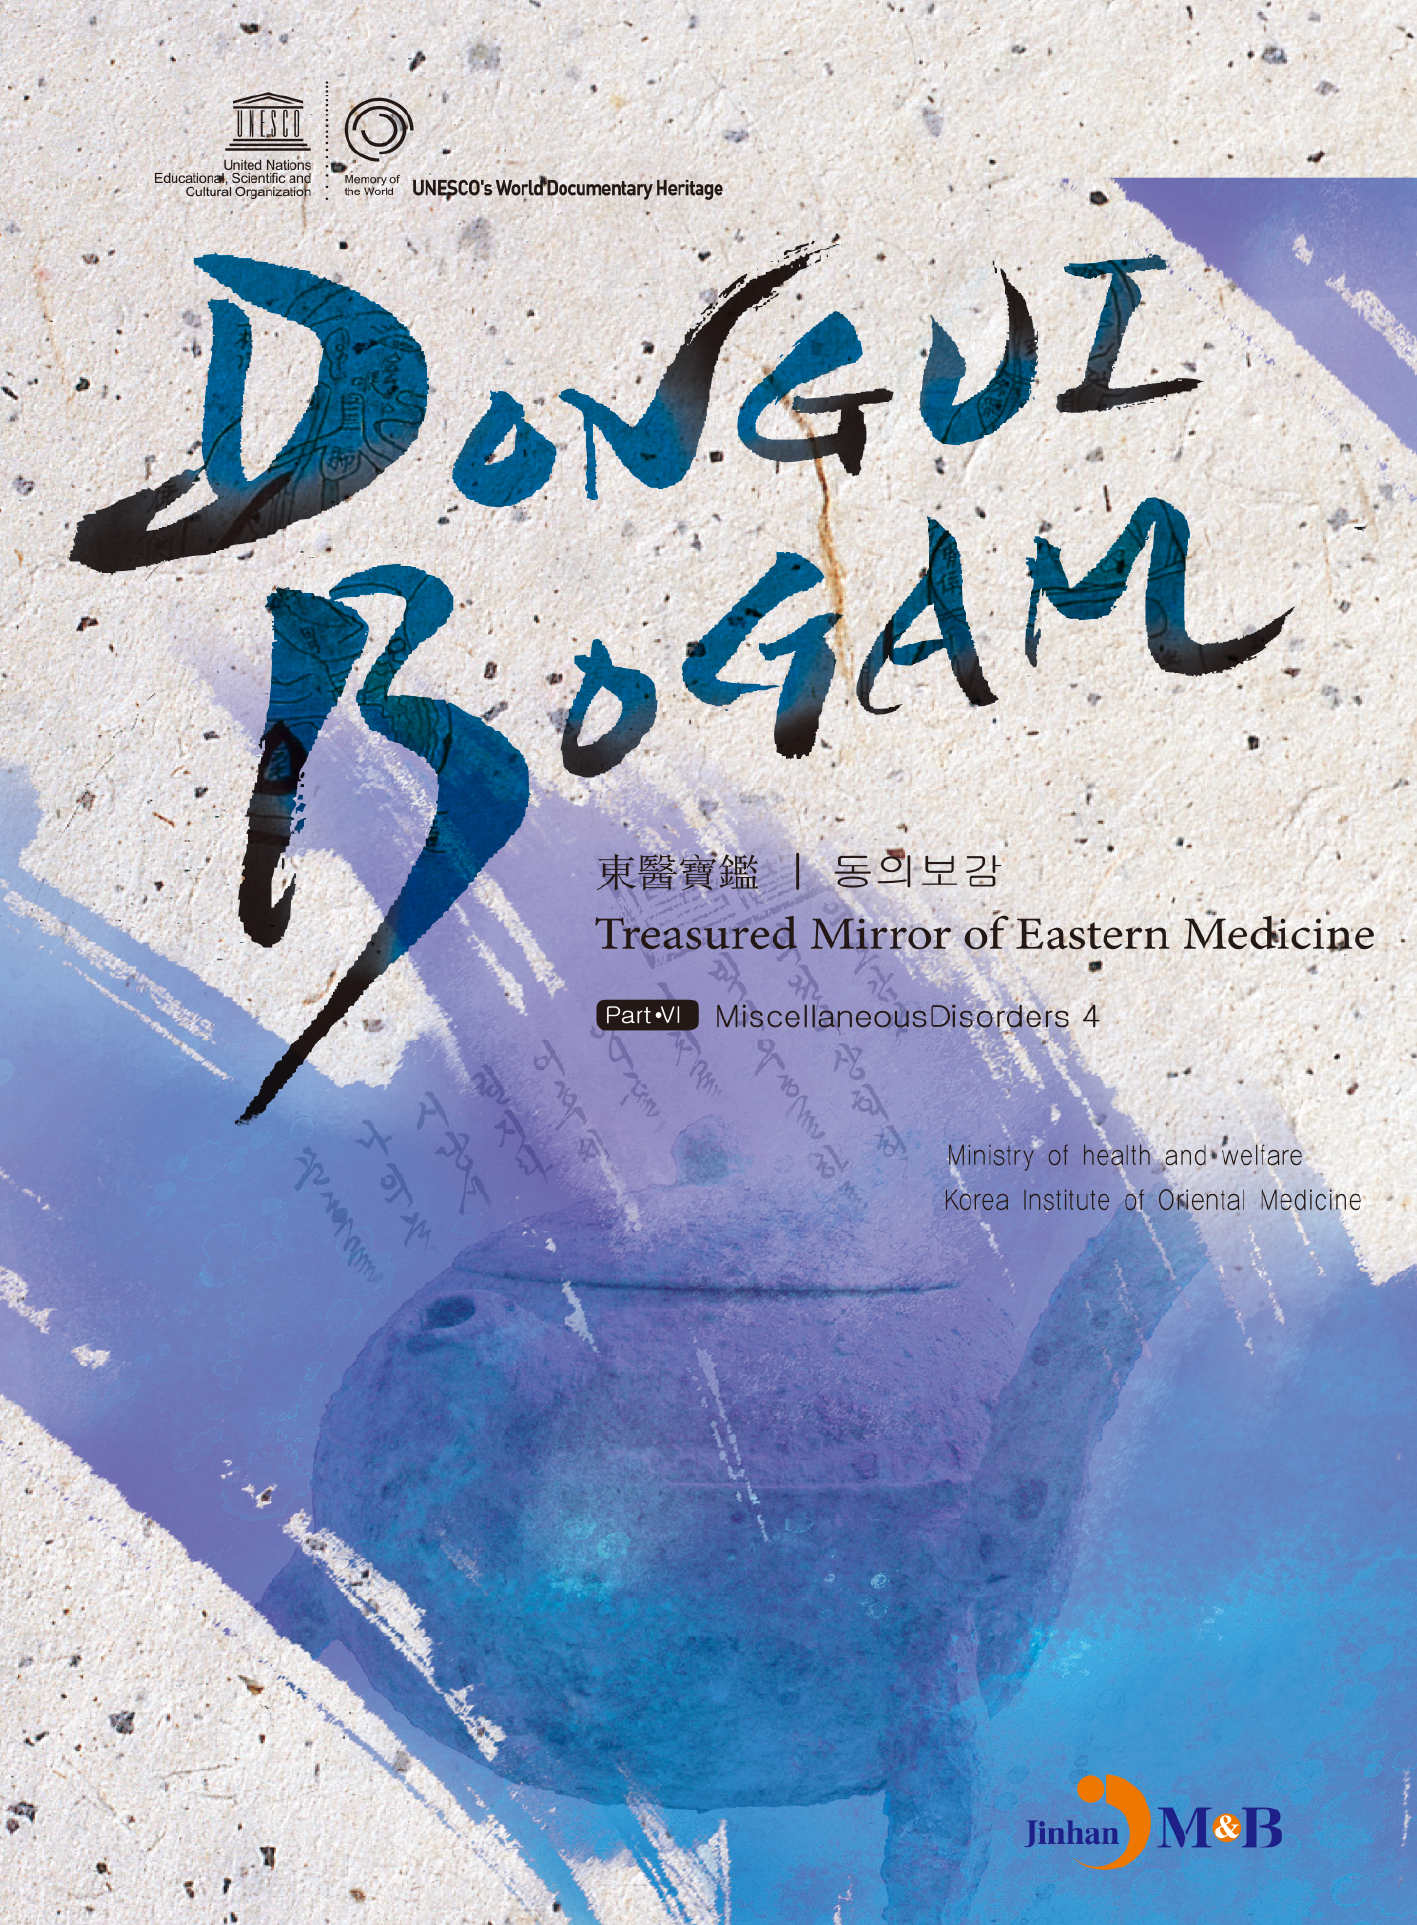 DONGUIBOGAM Part. 6: Miscellaneous Disorders4(잡병4)